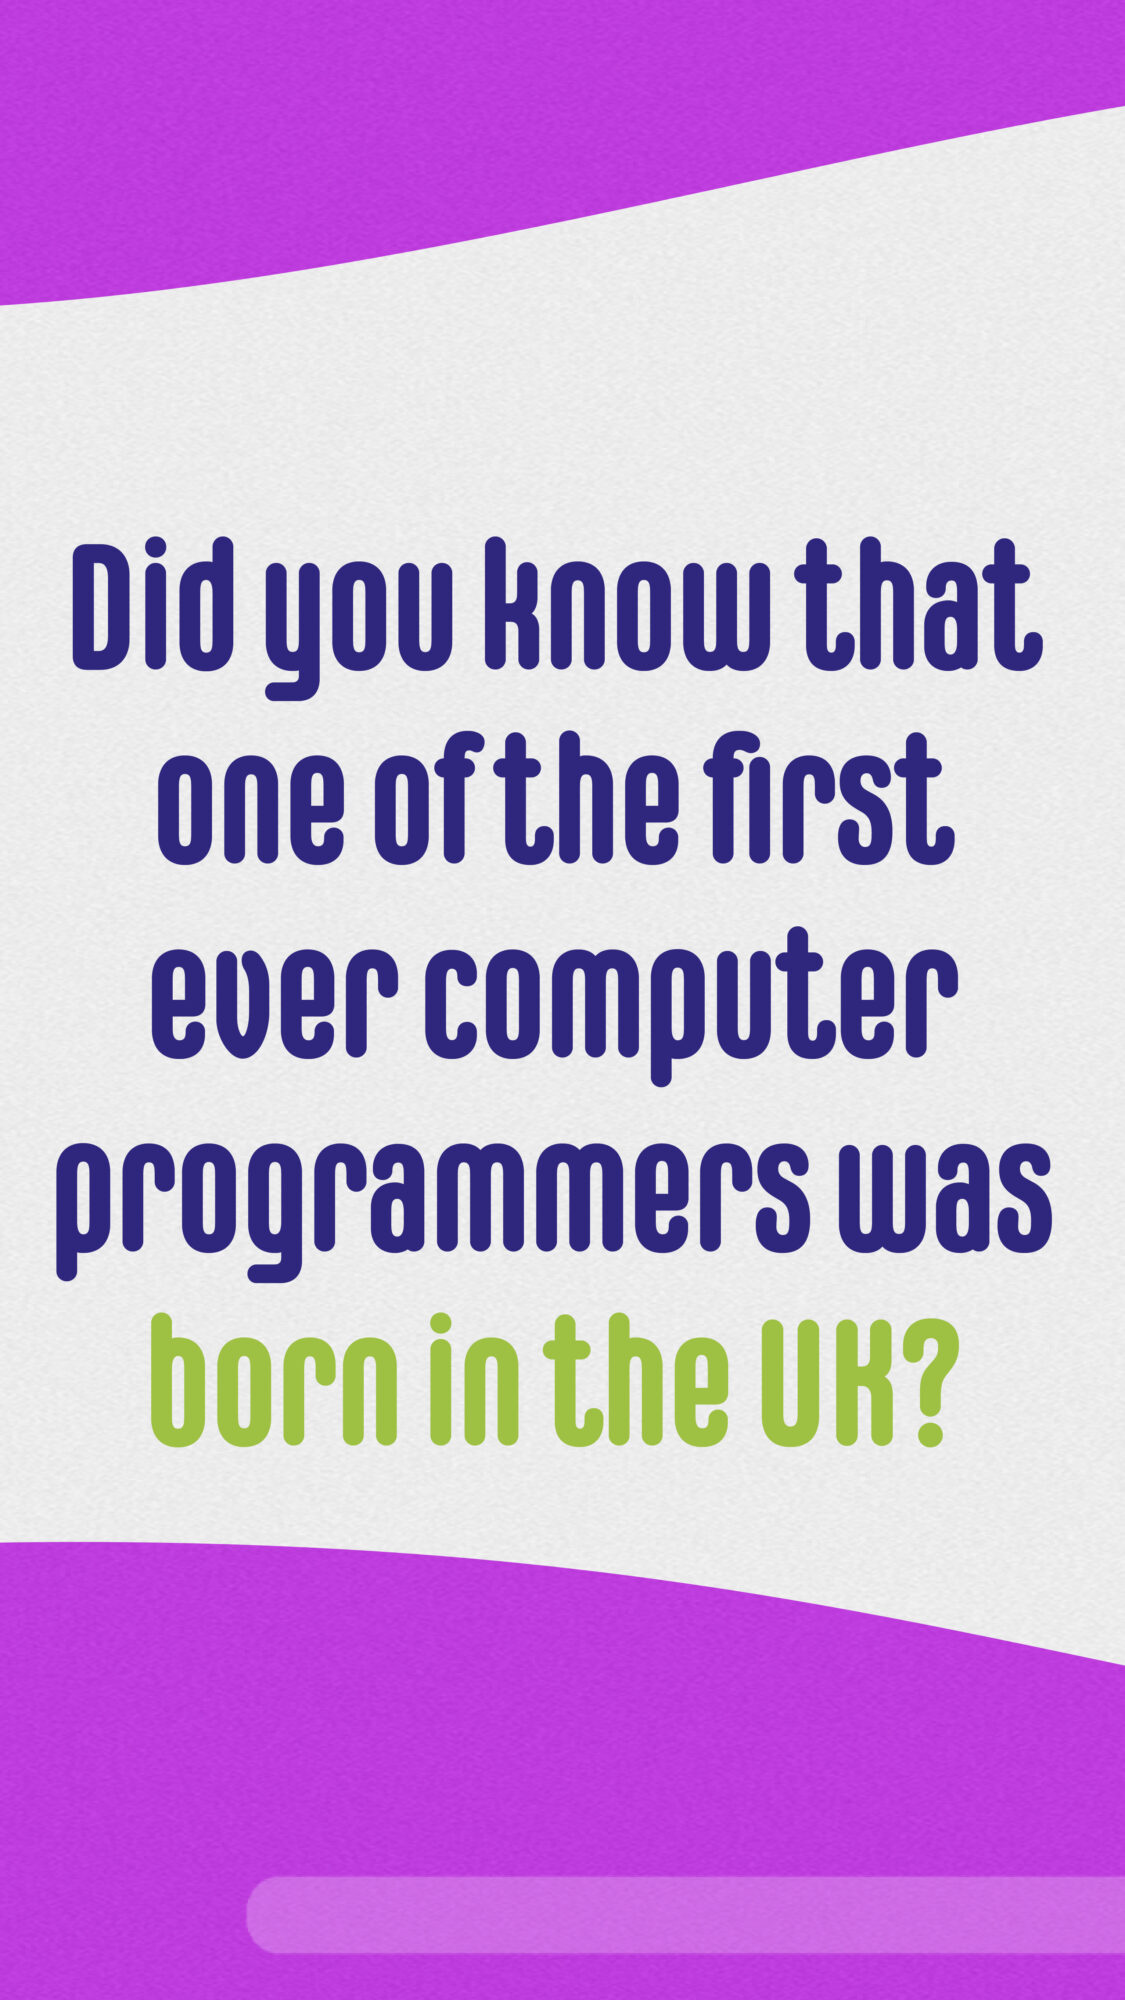 An infographic on Ava Lovelace. 'Did you know that one of the first ever computer programmers was born in the UK.'